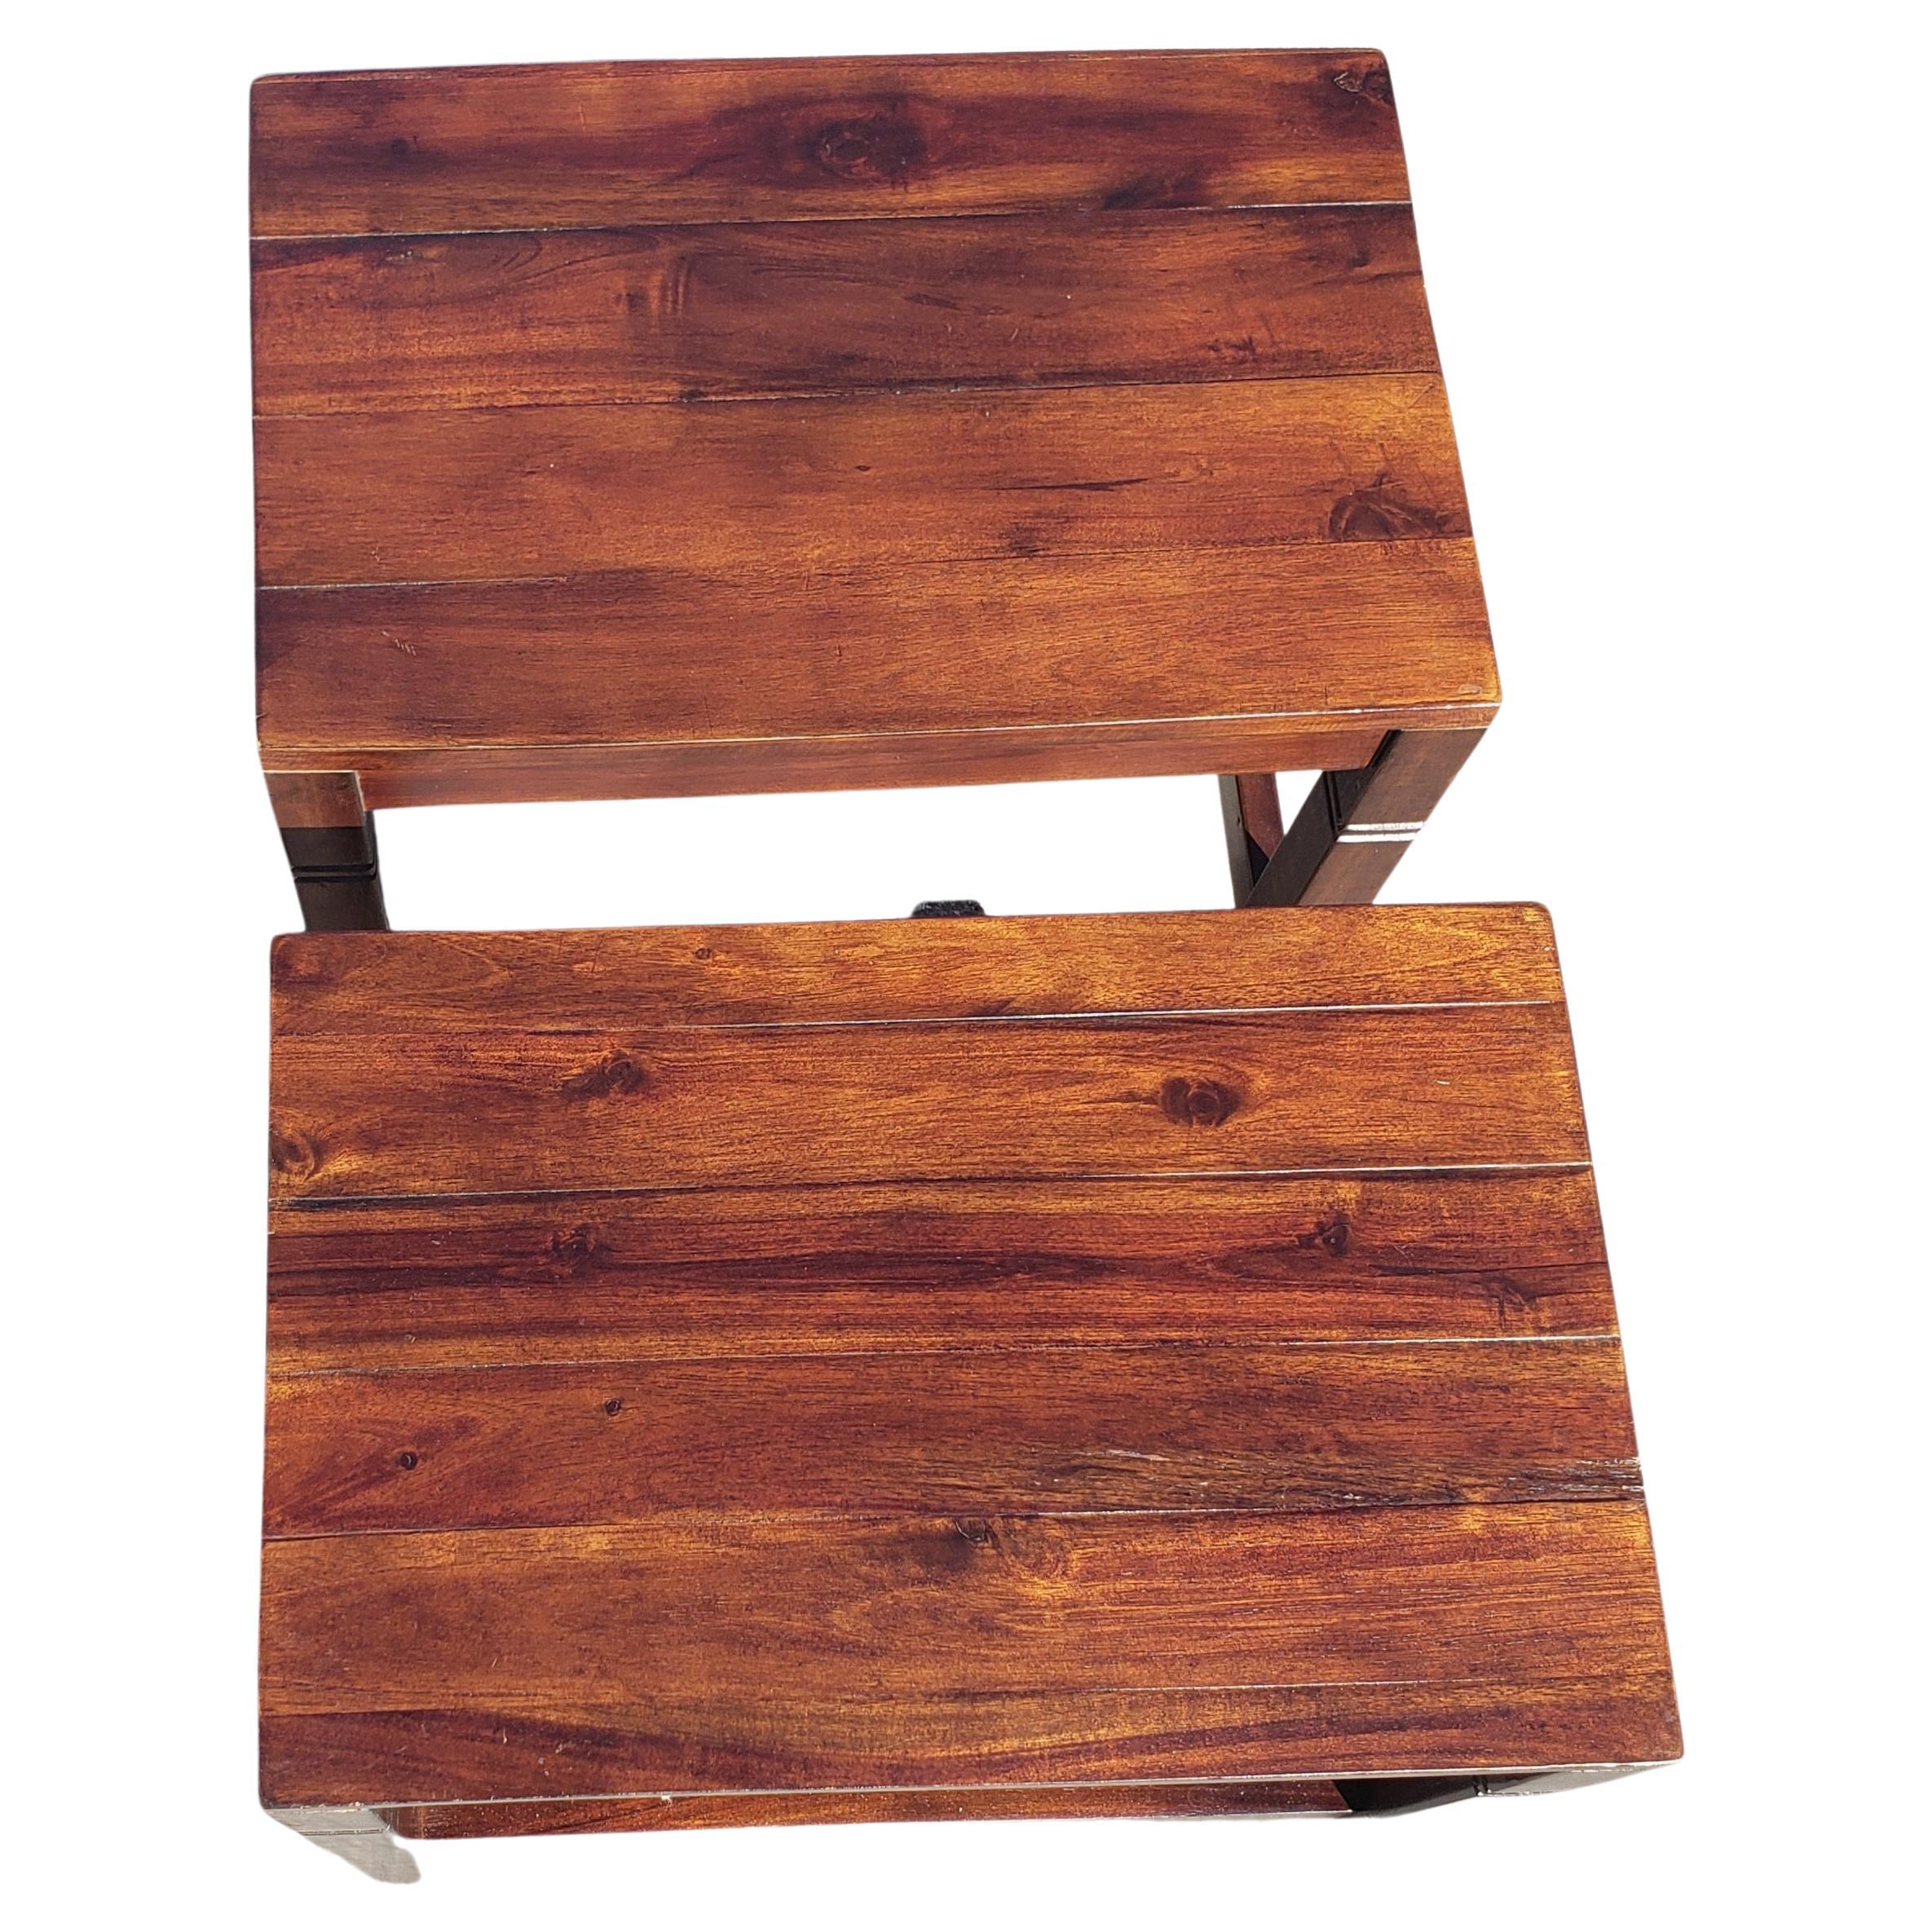 American Solid Walnut Rectangular Side Tables, a Pair For Sale